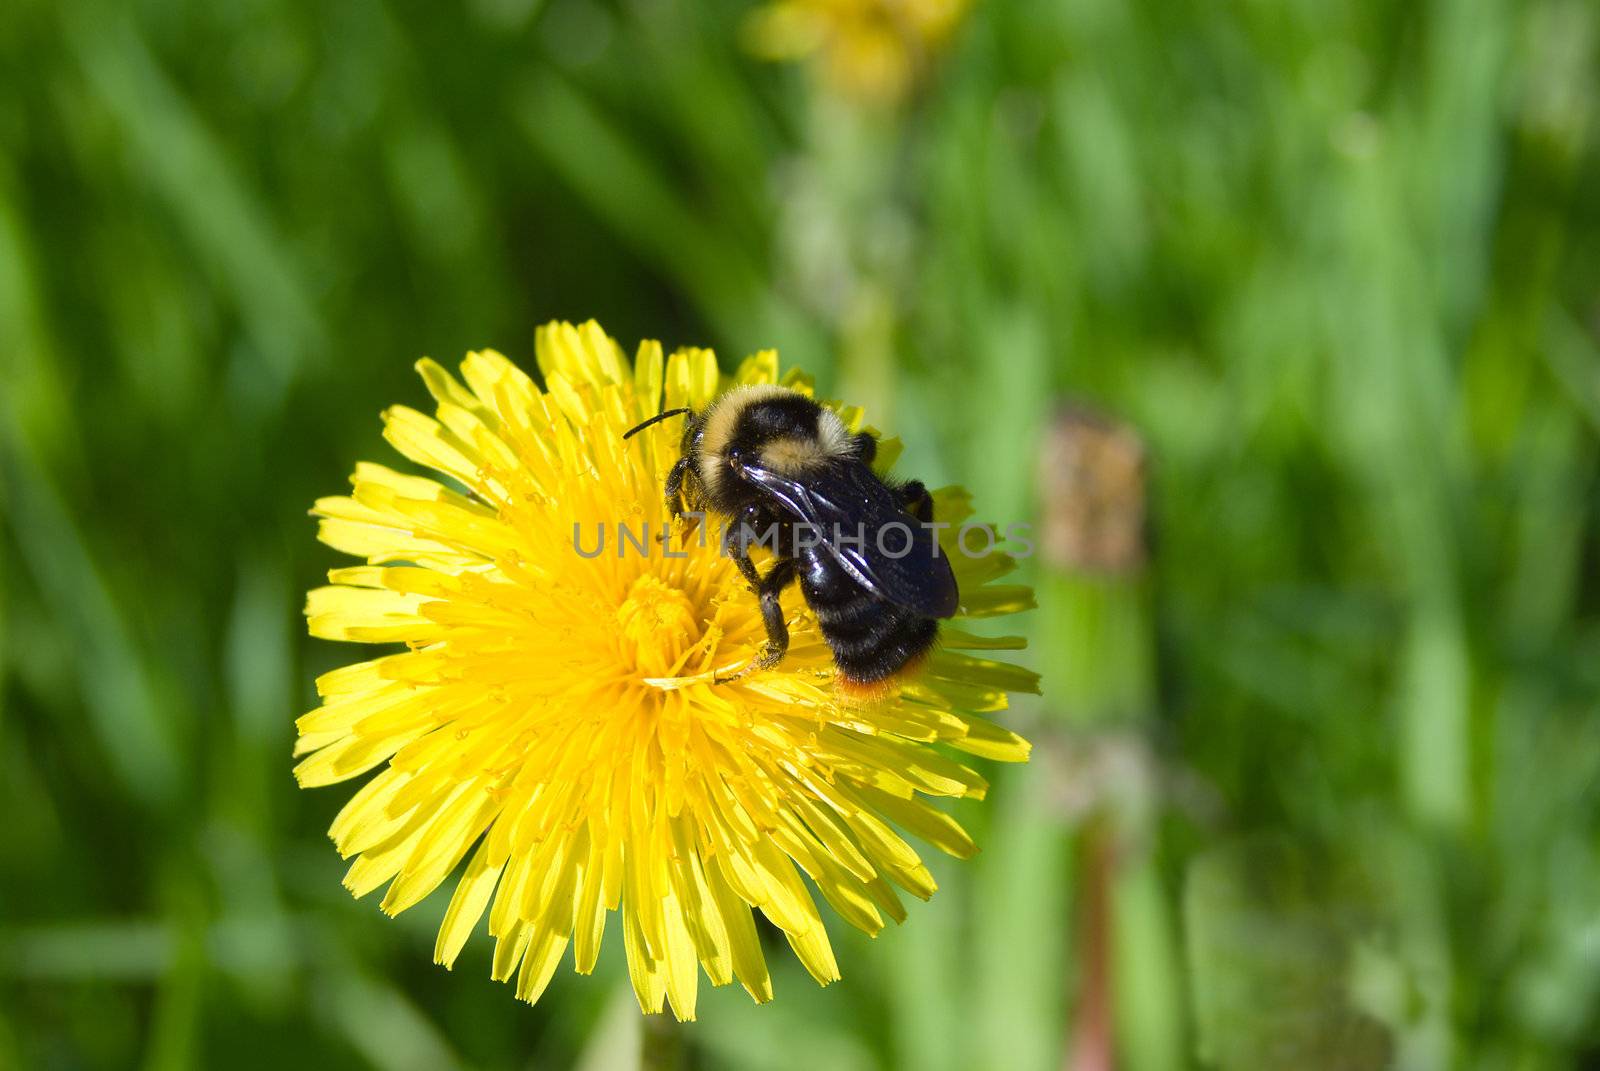 The bumblebee collects honey on a dandelion